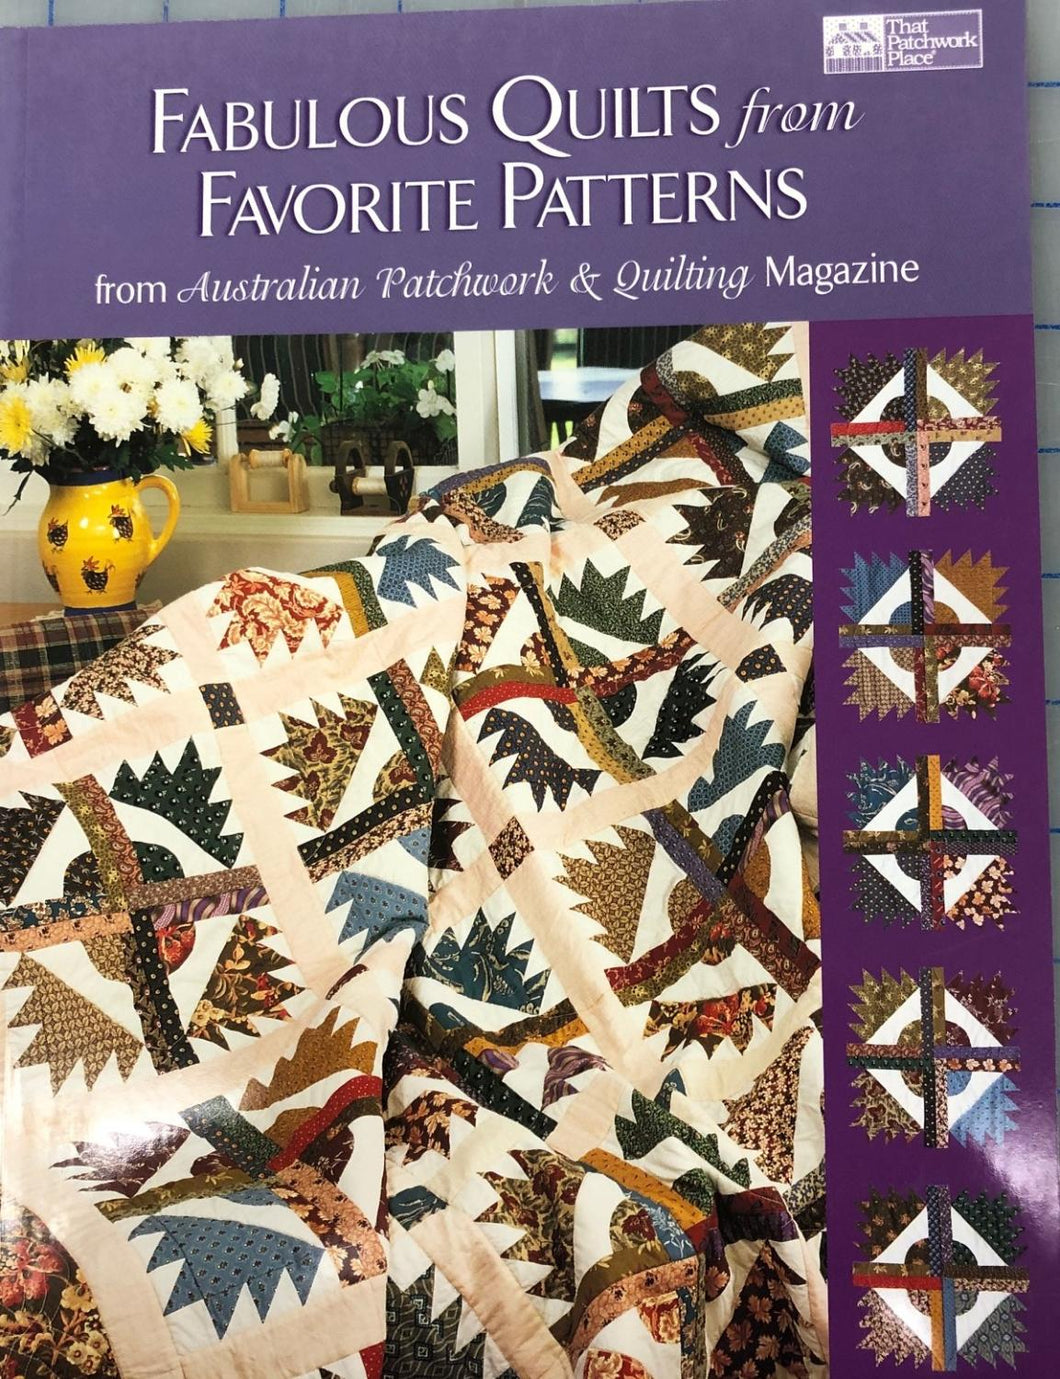 Fabulous Quilts from Favorite Patterns